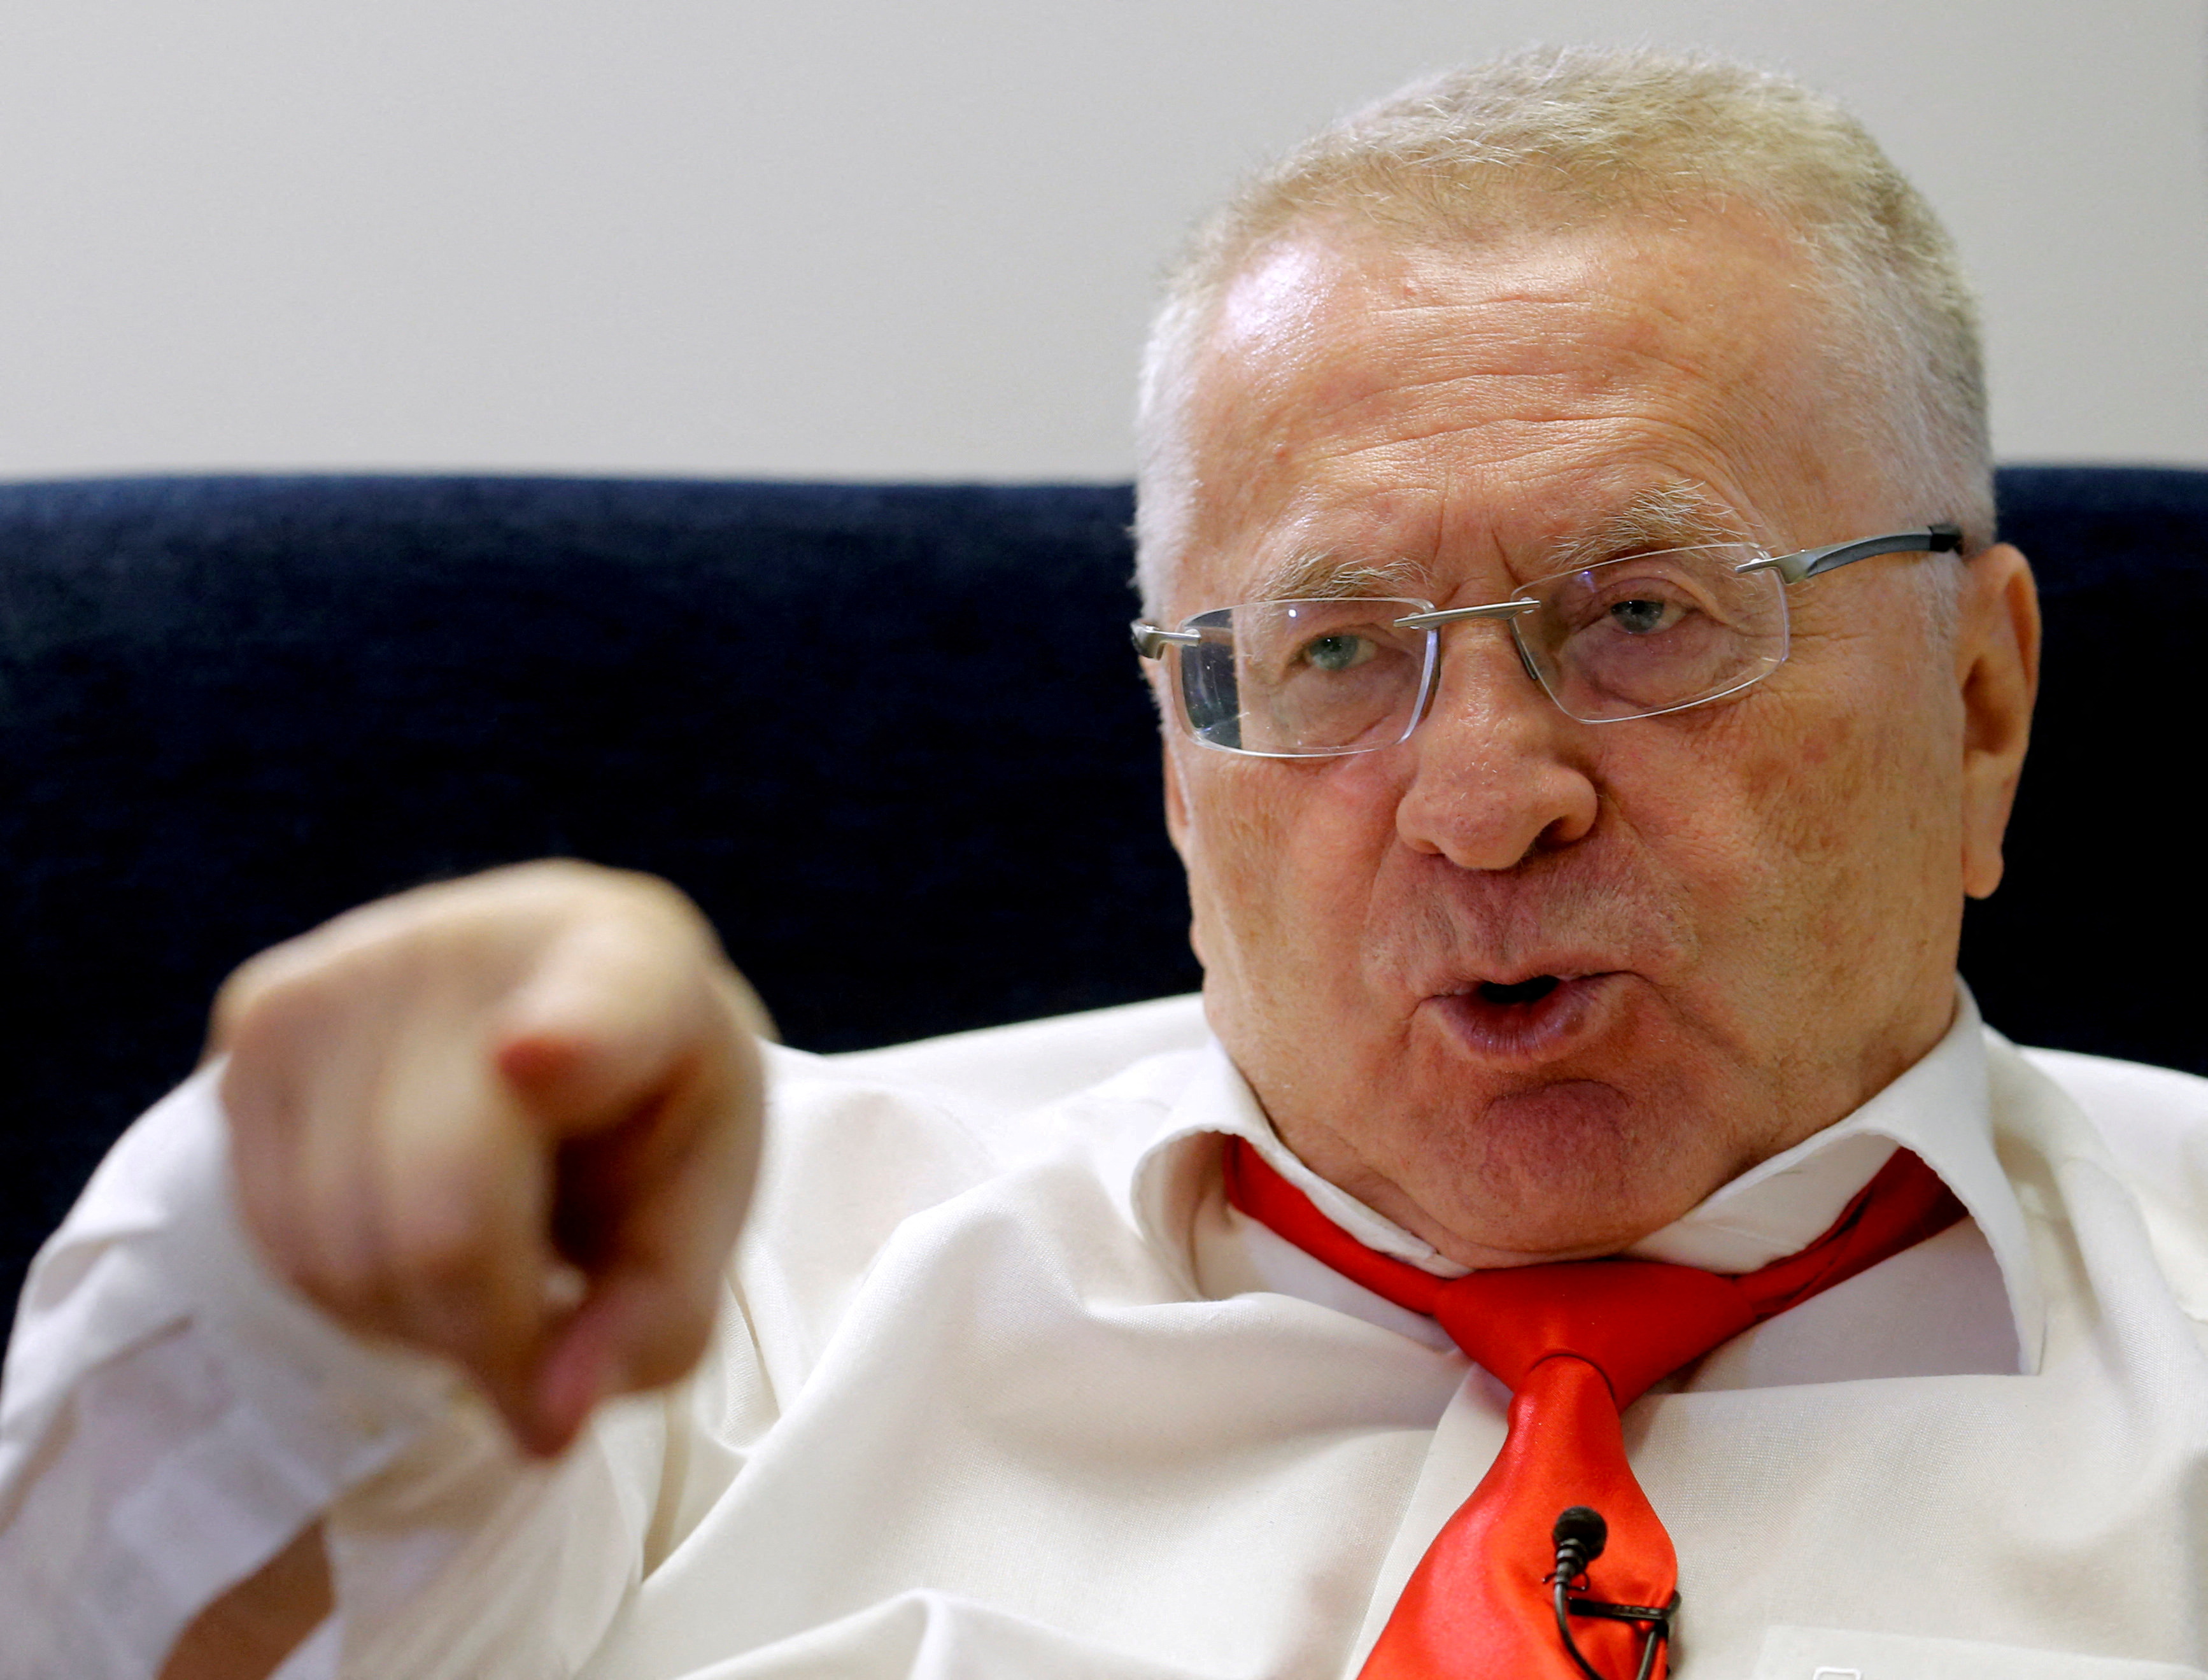 Leader of Liberal Democratic Party of Russia Zhirinovsky speaks during interview with Reuters in Moscow